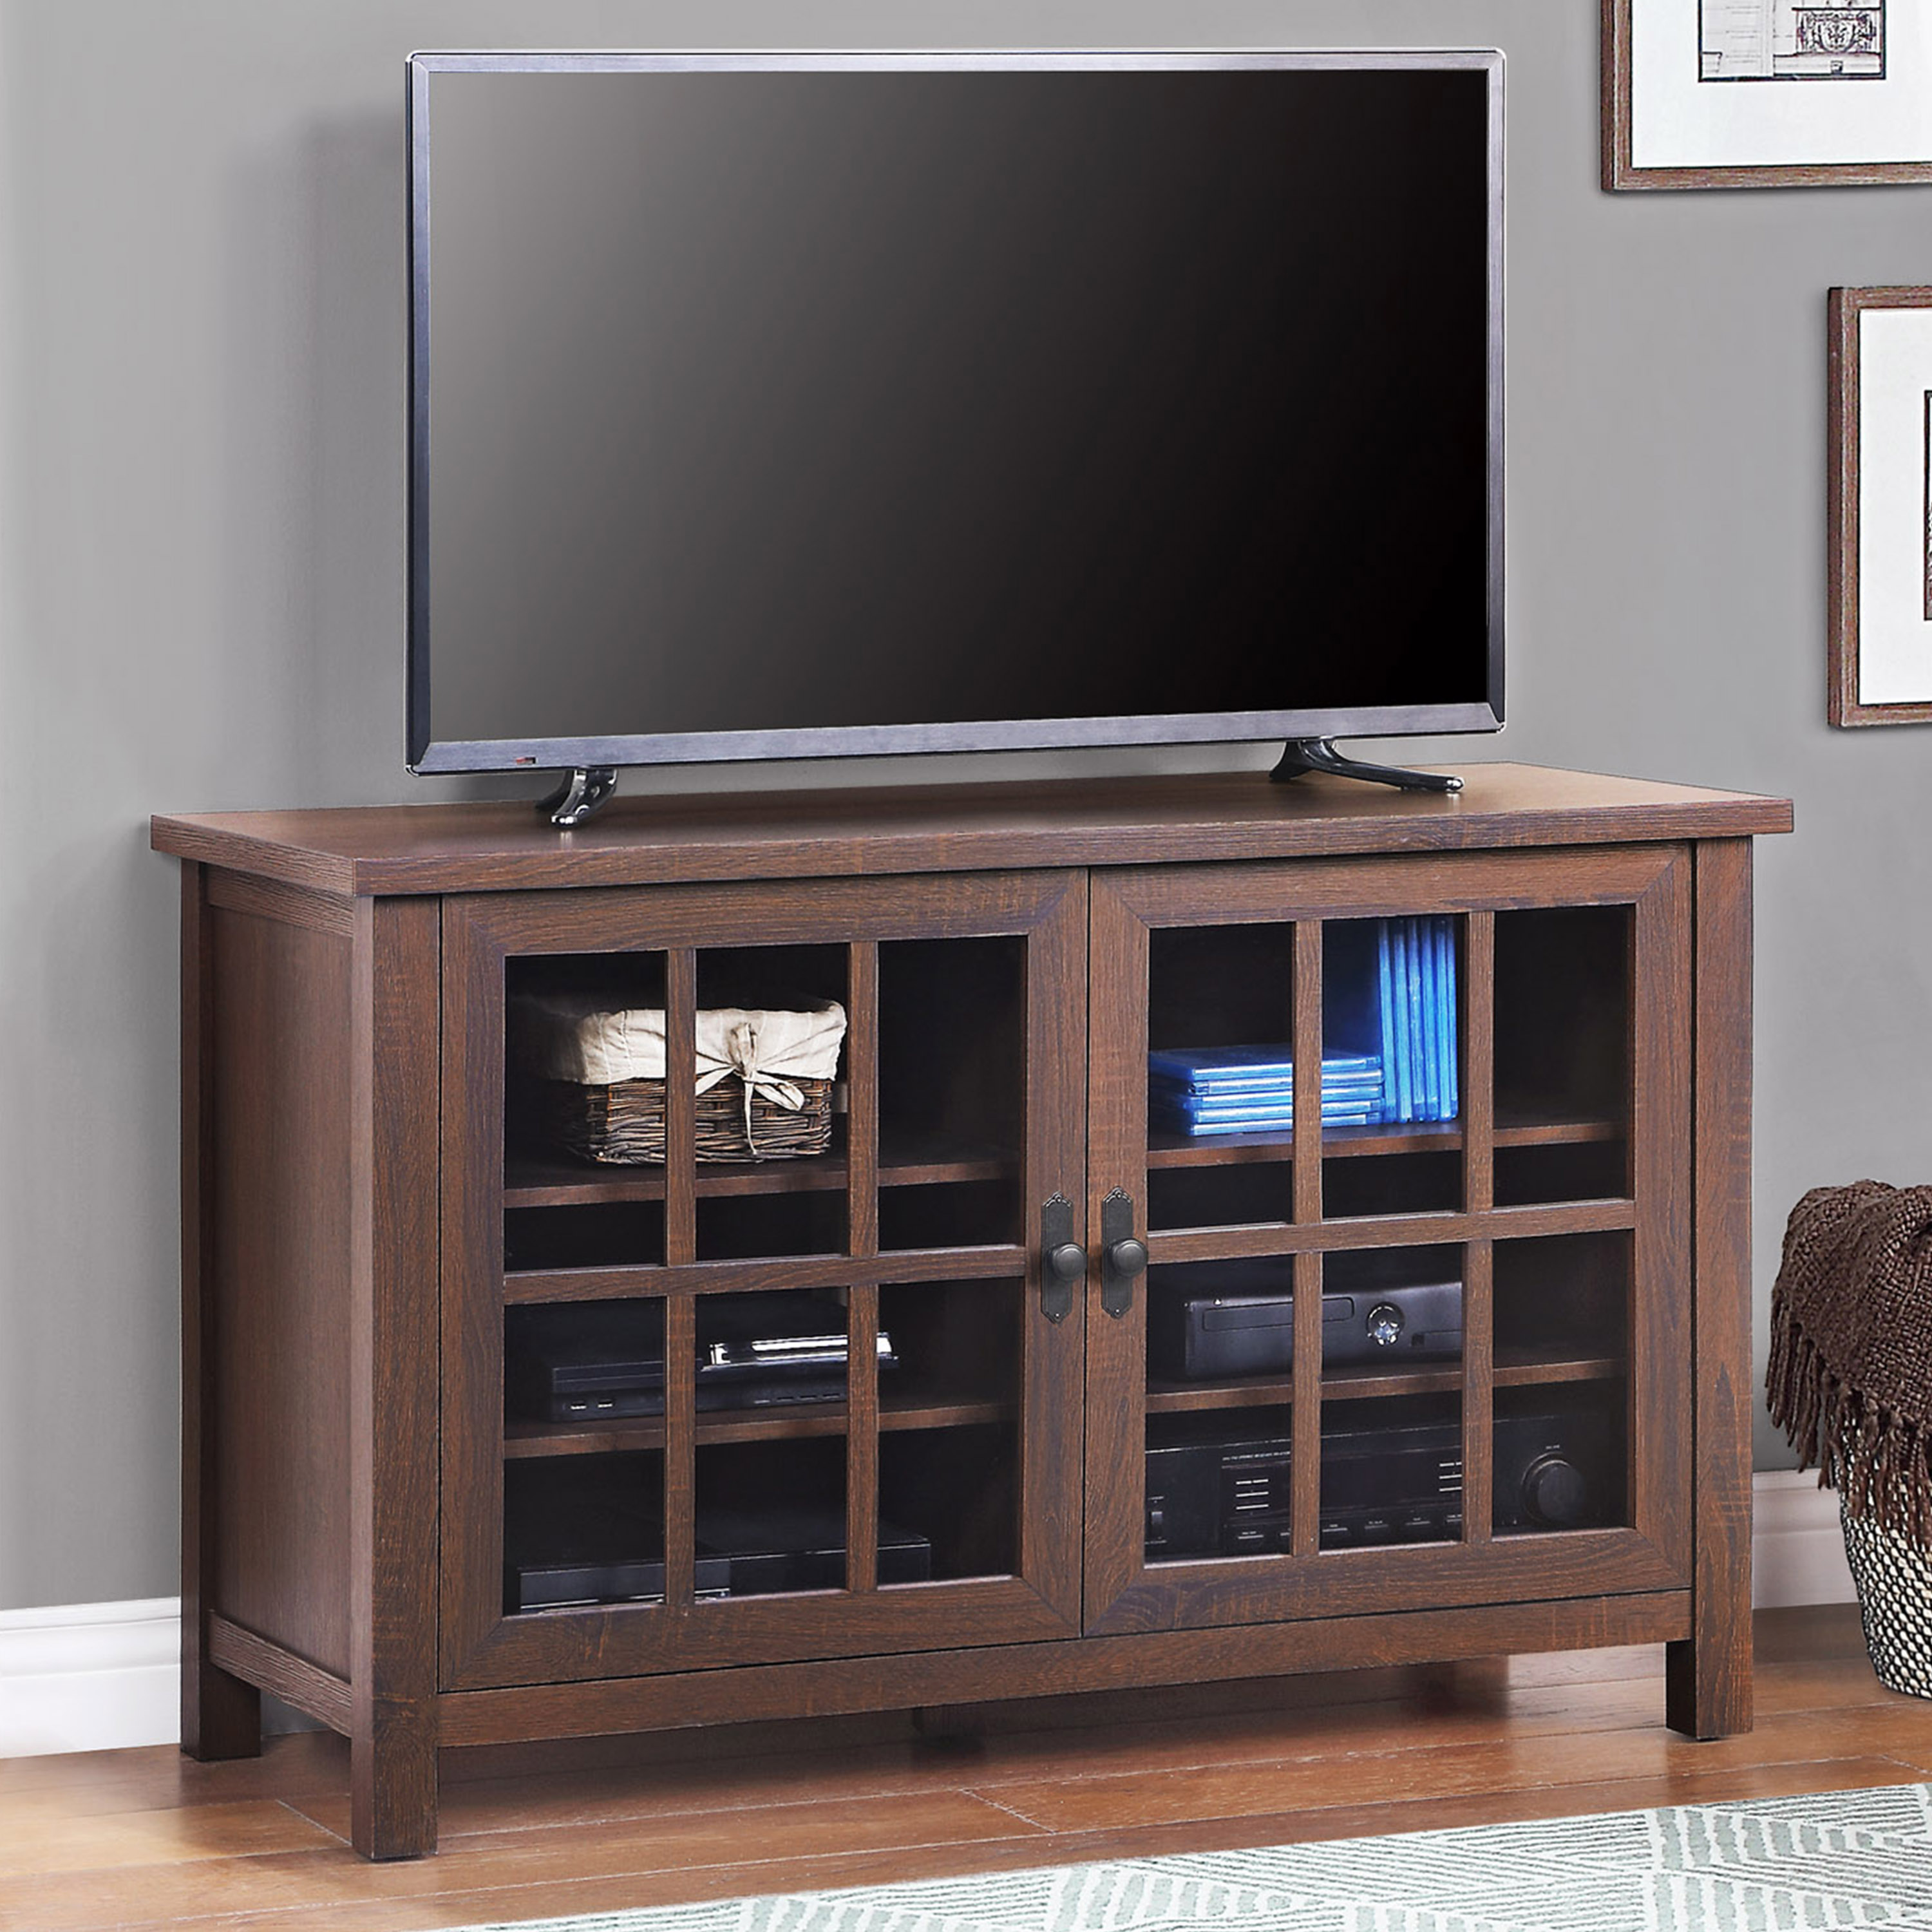 Better Homes & Gardens Oxford Square TV Stand for TVs up to 55", Dark Brown - image 1 of 12